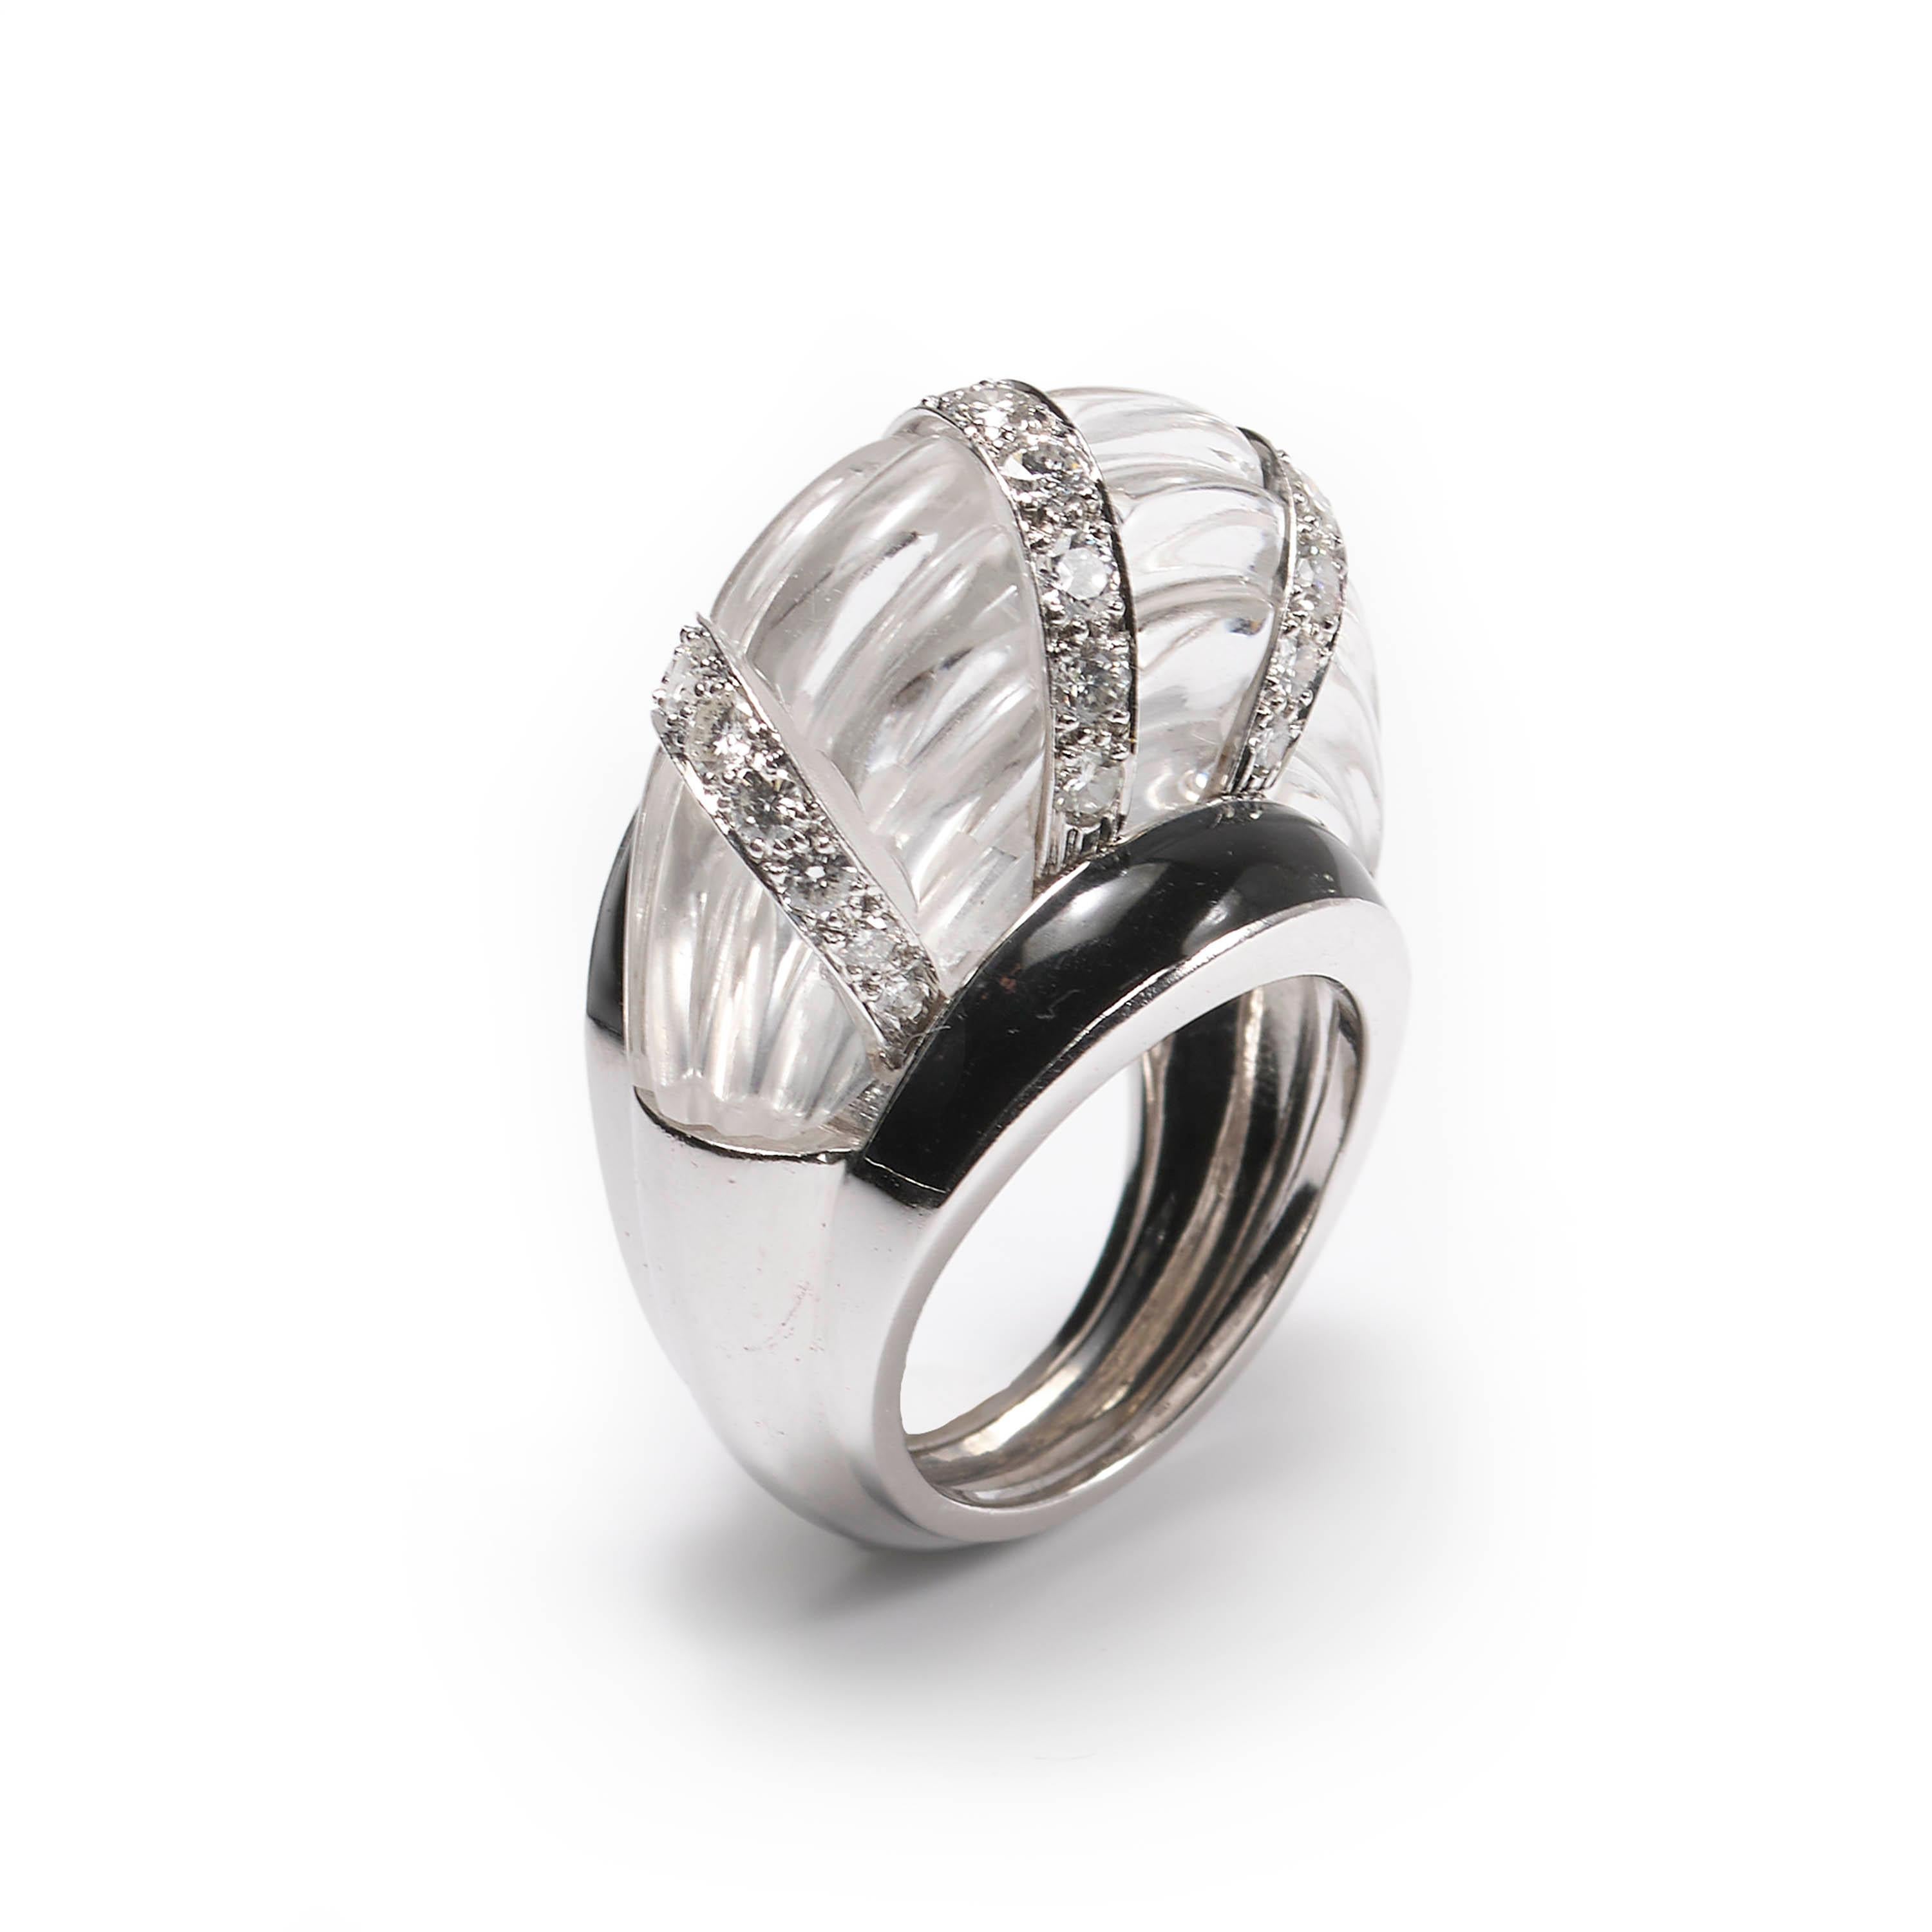 A vintage David Webb bombé style ring, comprised of a raised rock crystal centre, carved to create a horizontal, ribbed design, crossed with three columns of round brilliant-cut diamonds set within it, with black enamel bands either side, mounted in